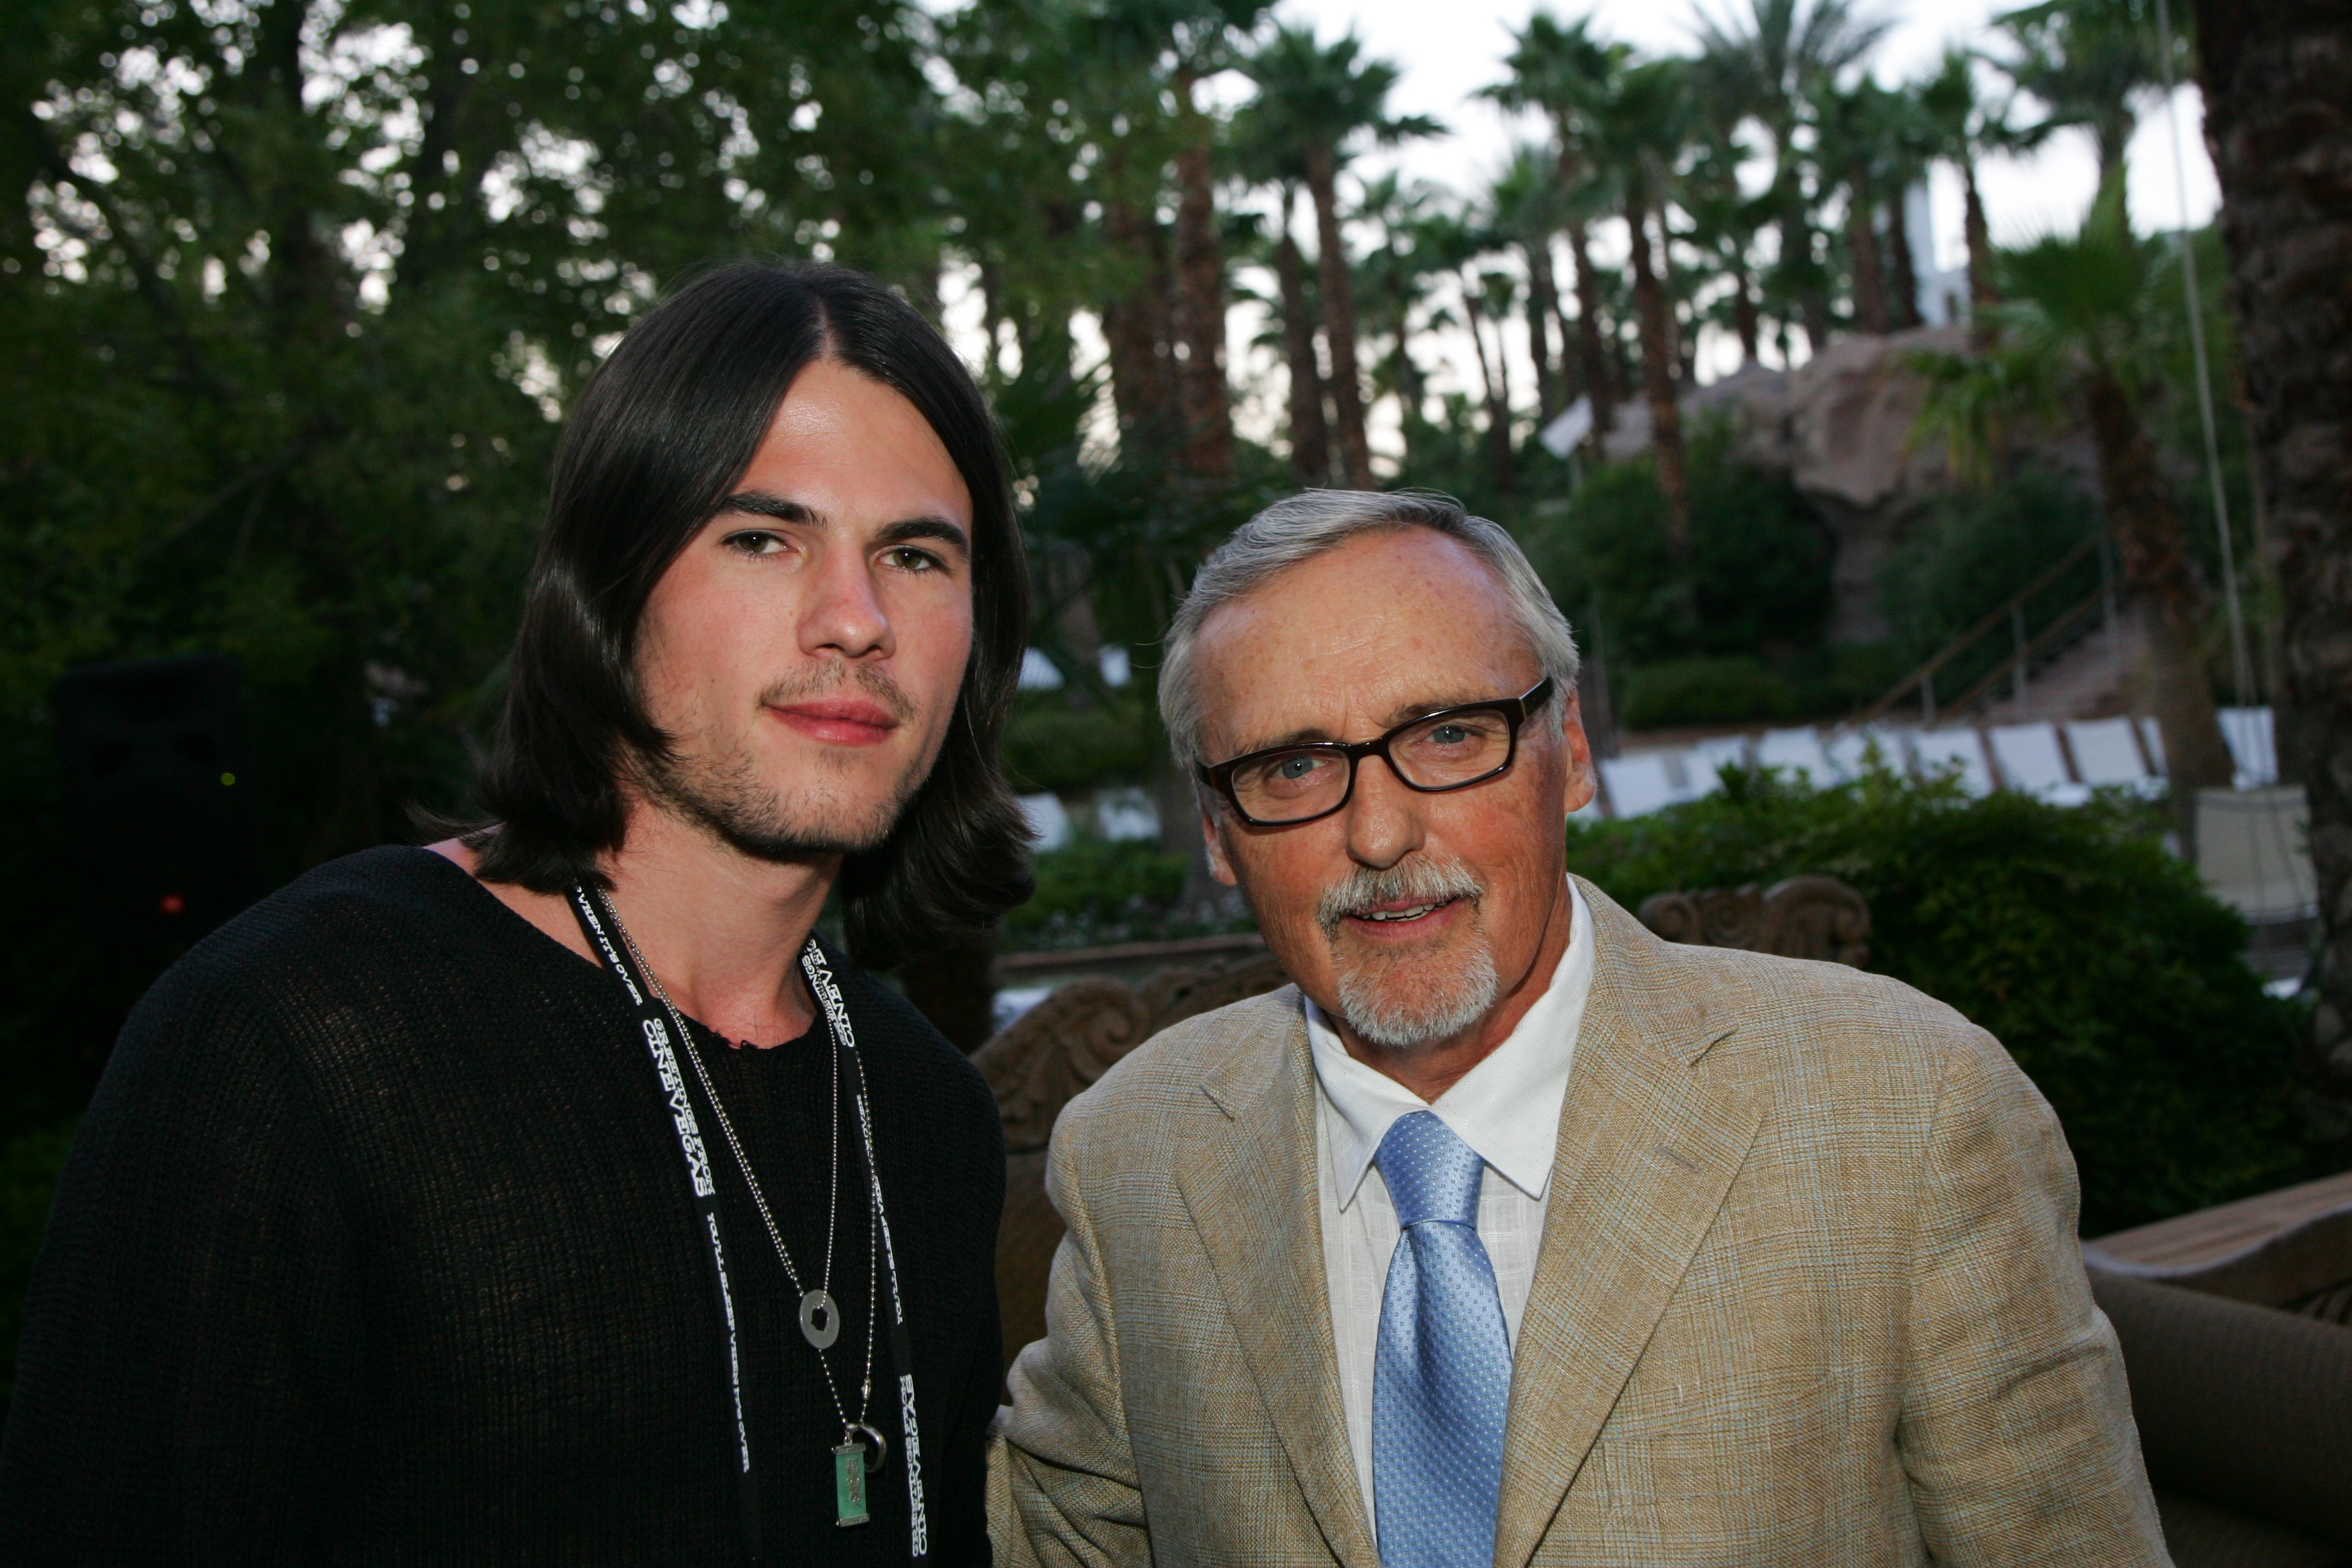 Actor Chandler Rylko from the film 'Have Love, Will Travel' (L) and actor and chair of the CineVegas creative advisory board Dennis Hopper attend the 'Jackpot Premieres' dinner sponsored by Mean Magazine held at Simon Kitchen & Bar inside the Hard Rock Hotel & Casino during the CineVegas film festival on June 11, 2007 in Las Vegas, Nevada.